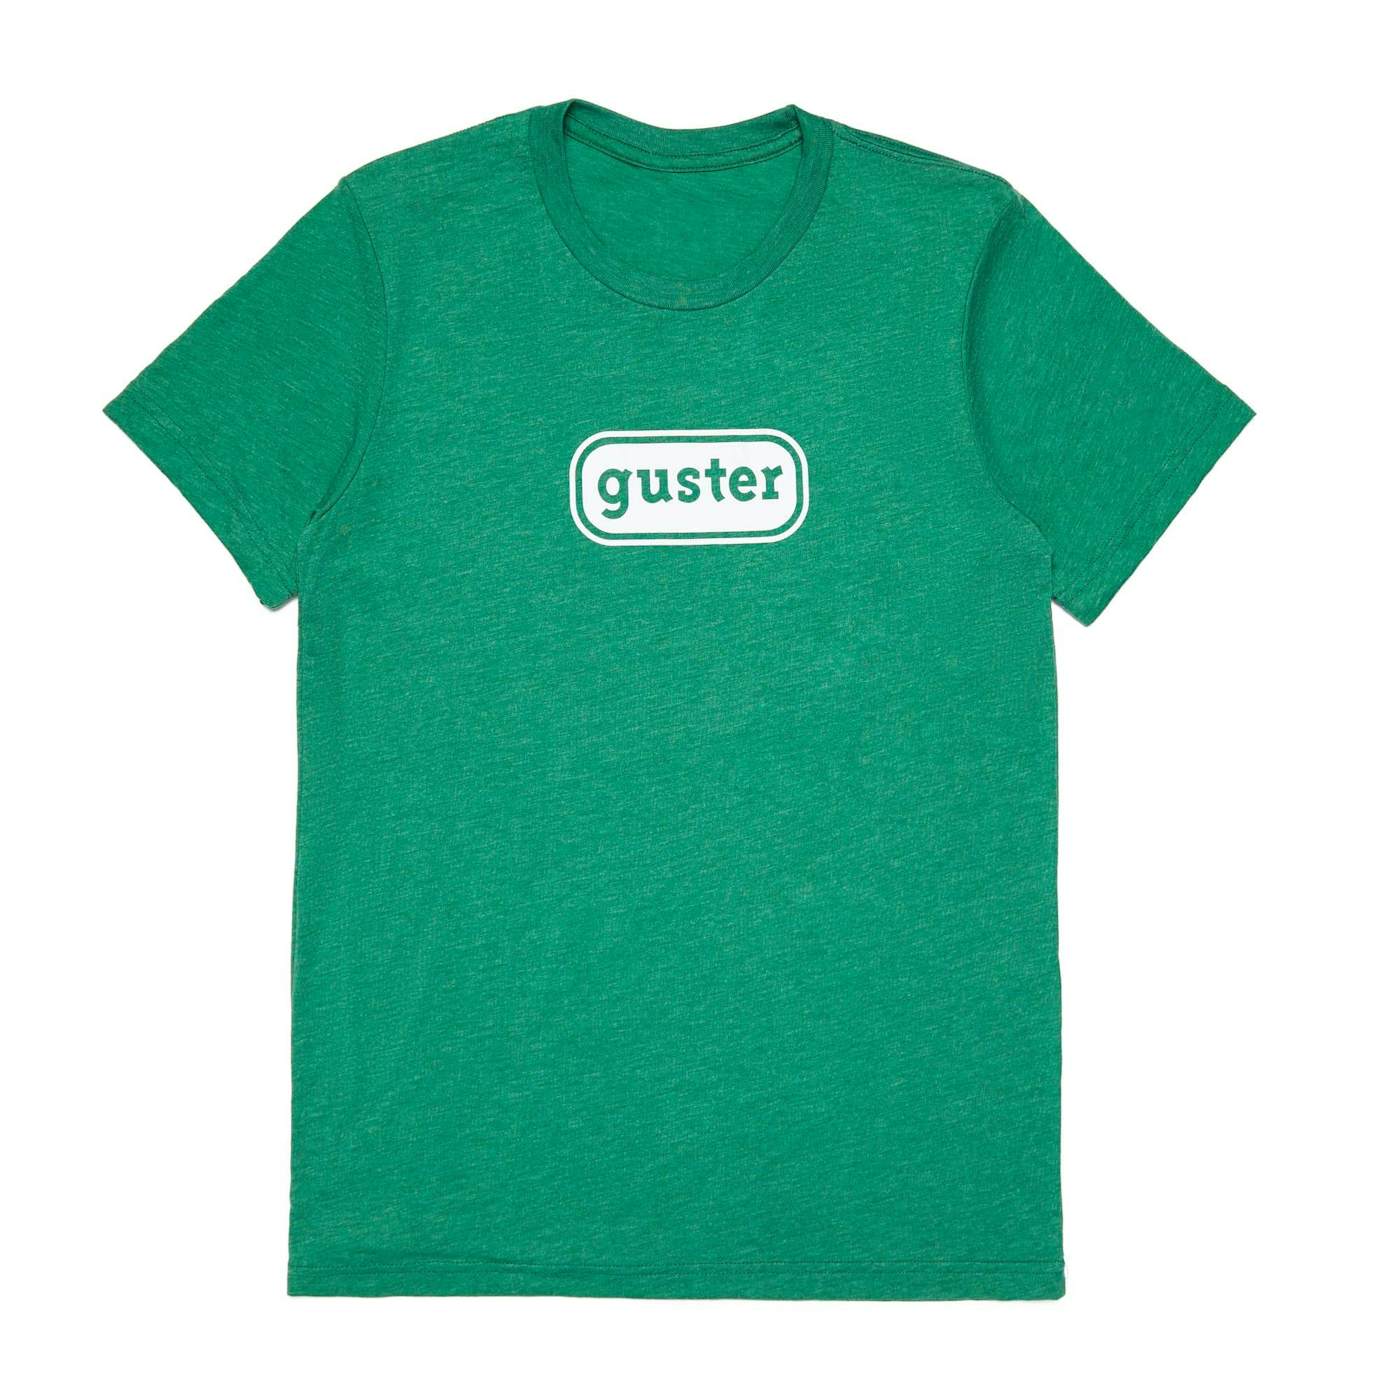 Guster 'Classic Oval' T-Shirt - Heather Grass Green